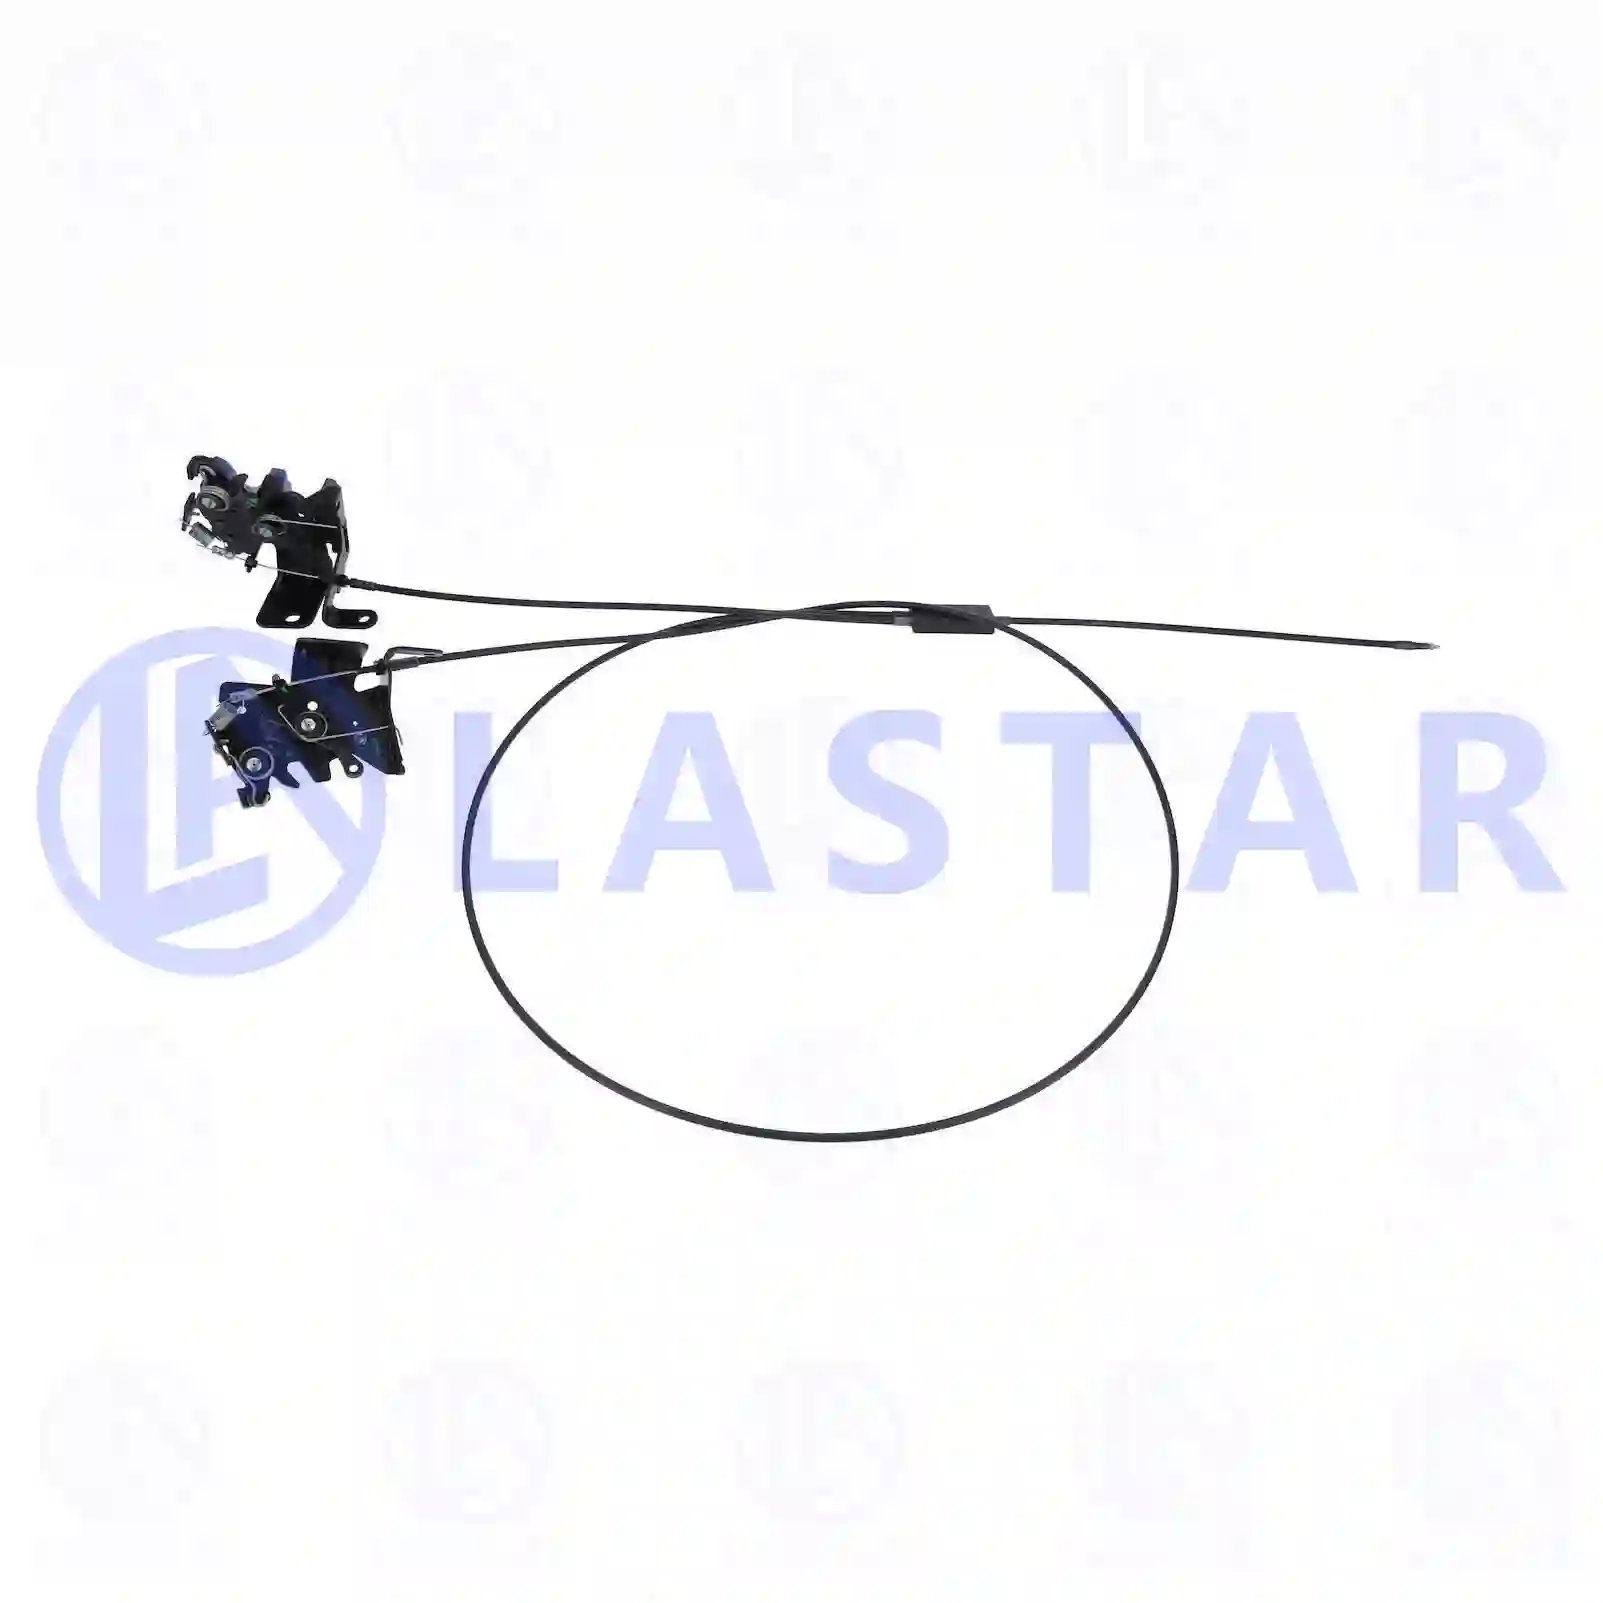 Locking device, engine hood, complete, 77721788, 1902353, 1908869 ||  77721788 Lastar Spare Part | Truck Spare Parts, Auotomotive Spare Parts Locking device, engine hood, complete, 77721788, 1902353, 1908869 ||  77721788 Lastar Spare Part | Truck Spare Parts, Auotomotive Spare Parts